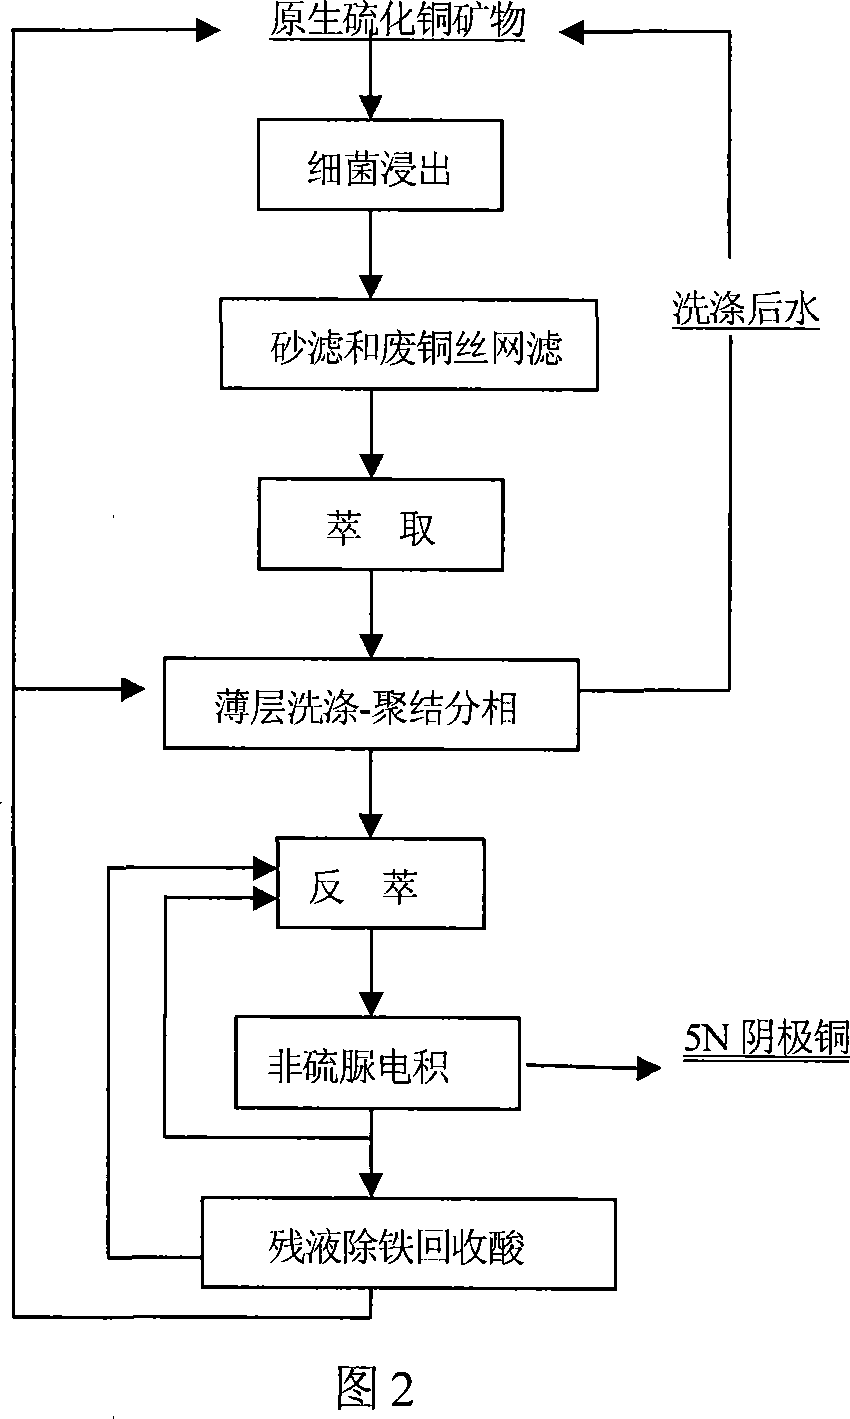 Method of preparing high purity copper by bacteria leaching primary sulfide ore